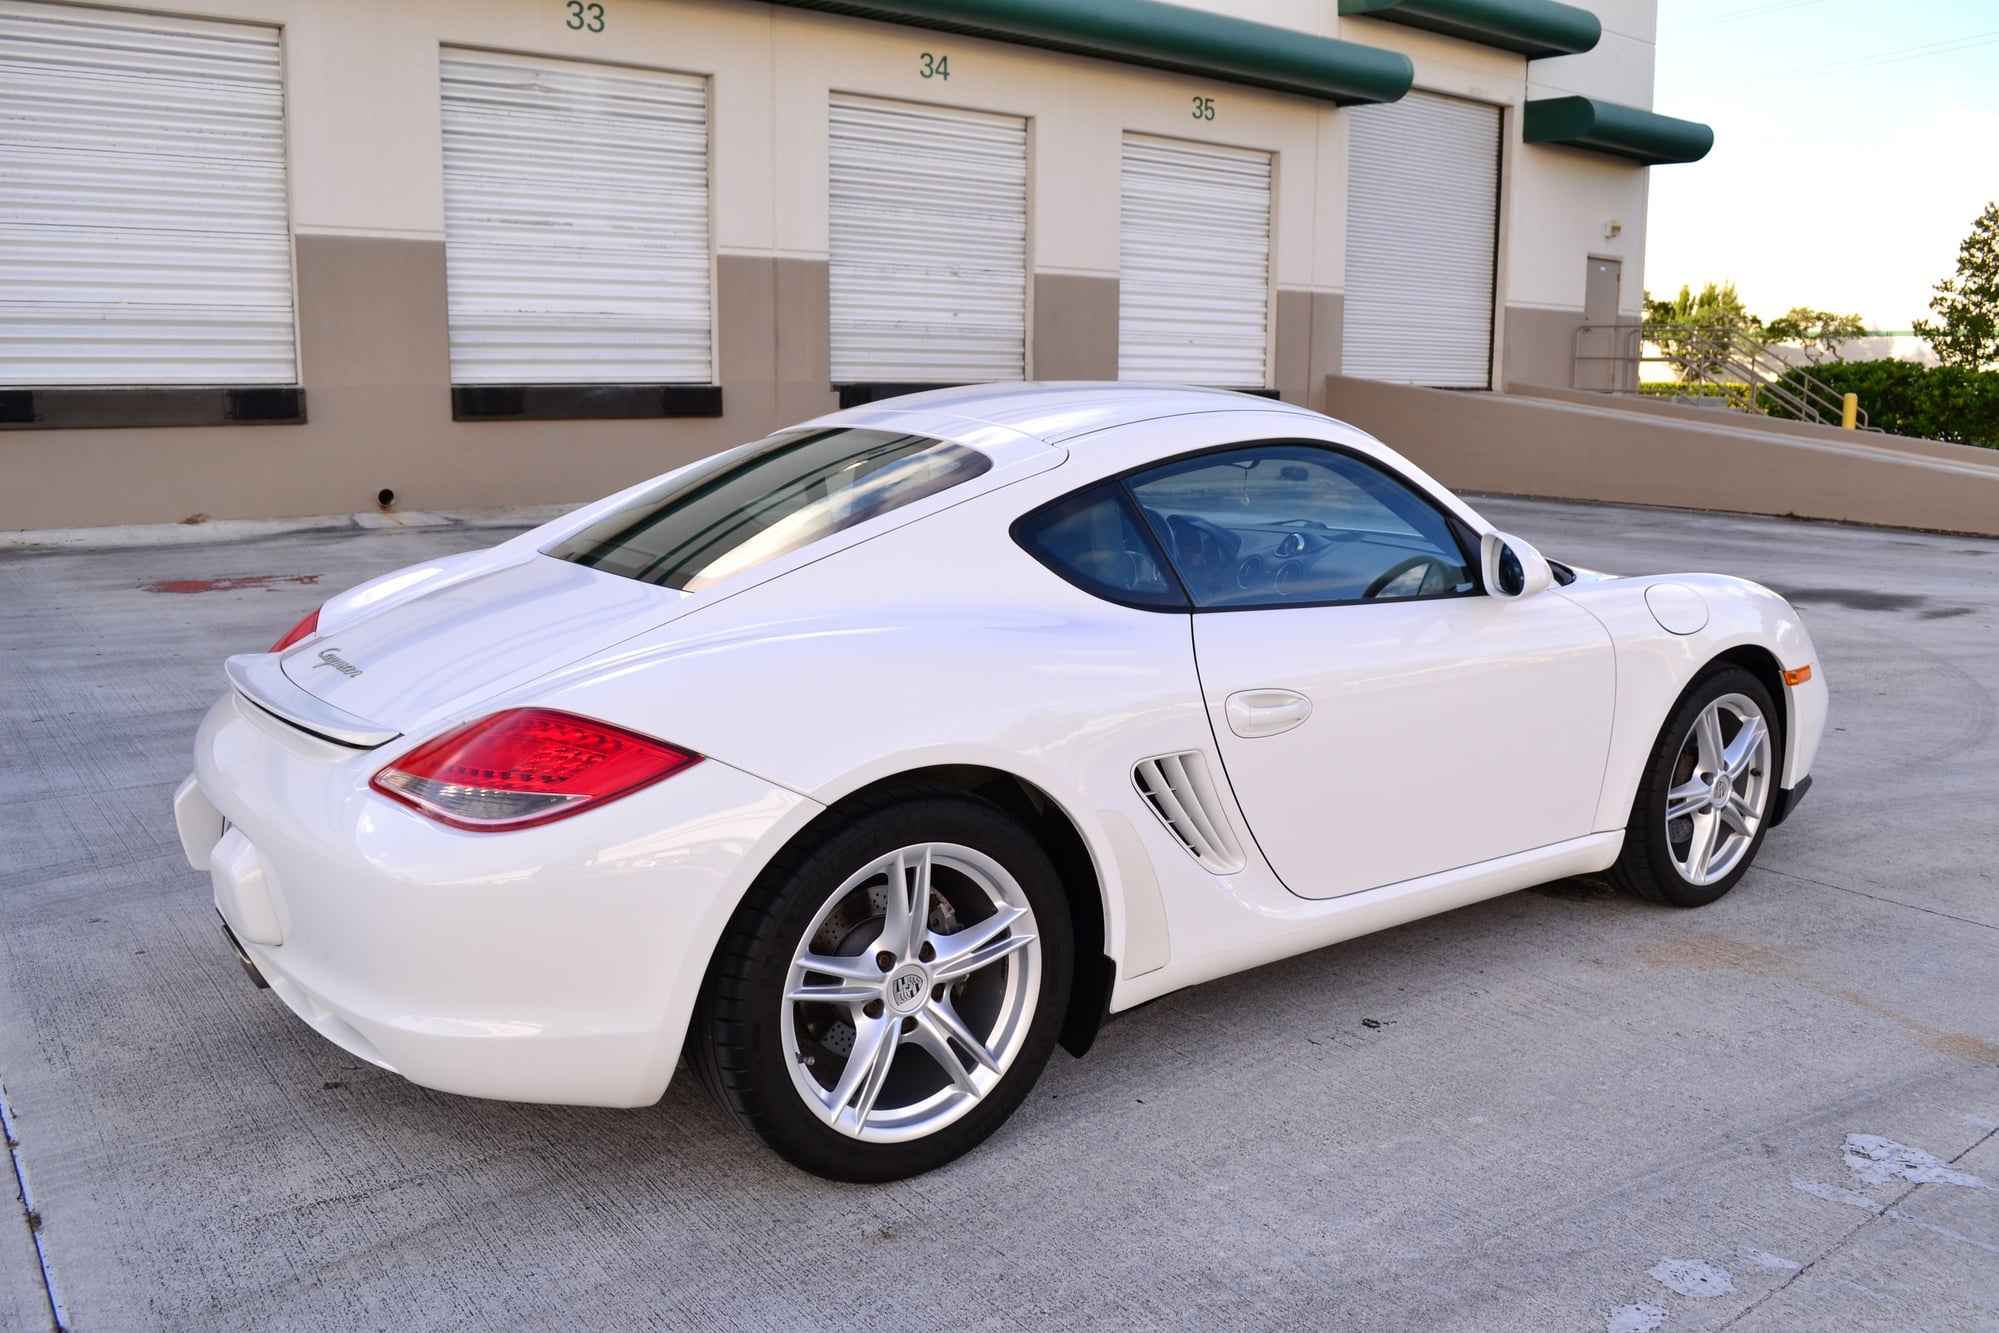 2010 Porsche Cayman - F/S 2010 Porsche Cayman PDK (Carrara white/sea blue) - Used - VIN WP0AA2A81AU760546 - 58,200 Miles - 6 cyl - 2WD - Automatic - Coupe - White - Lighthouse Point, FL 33064, United States